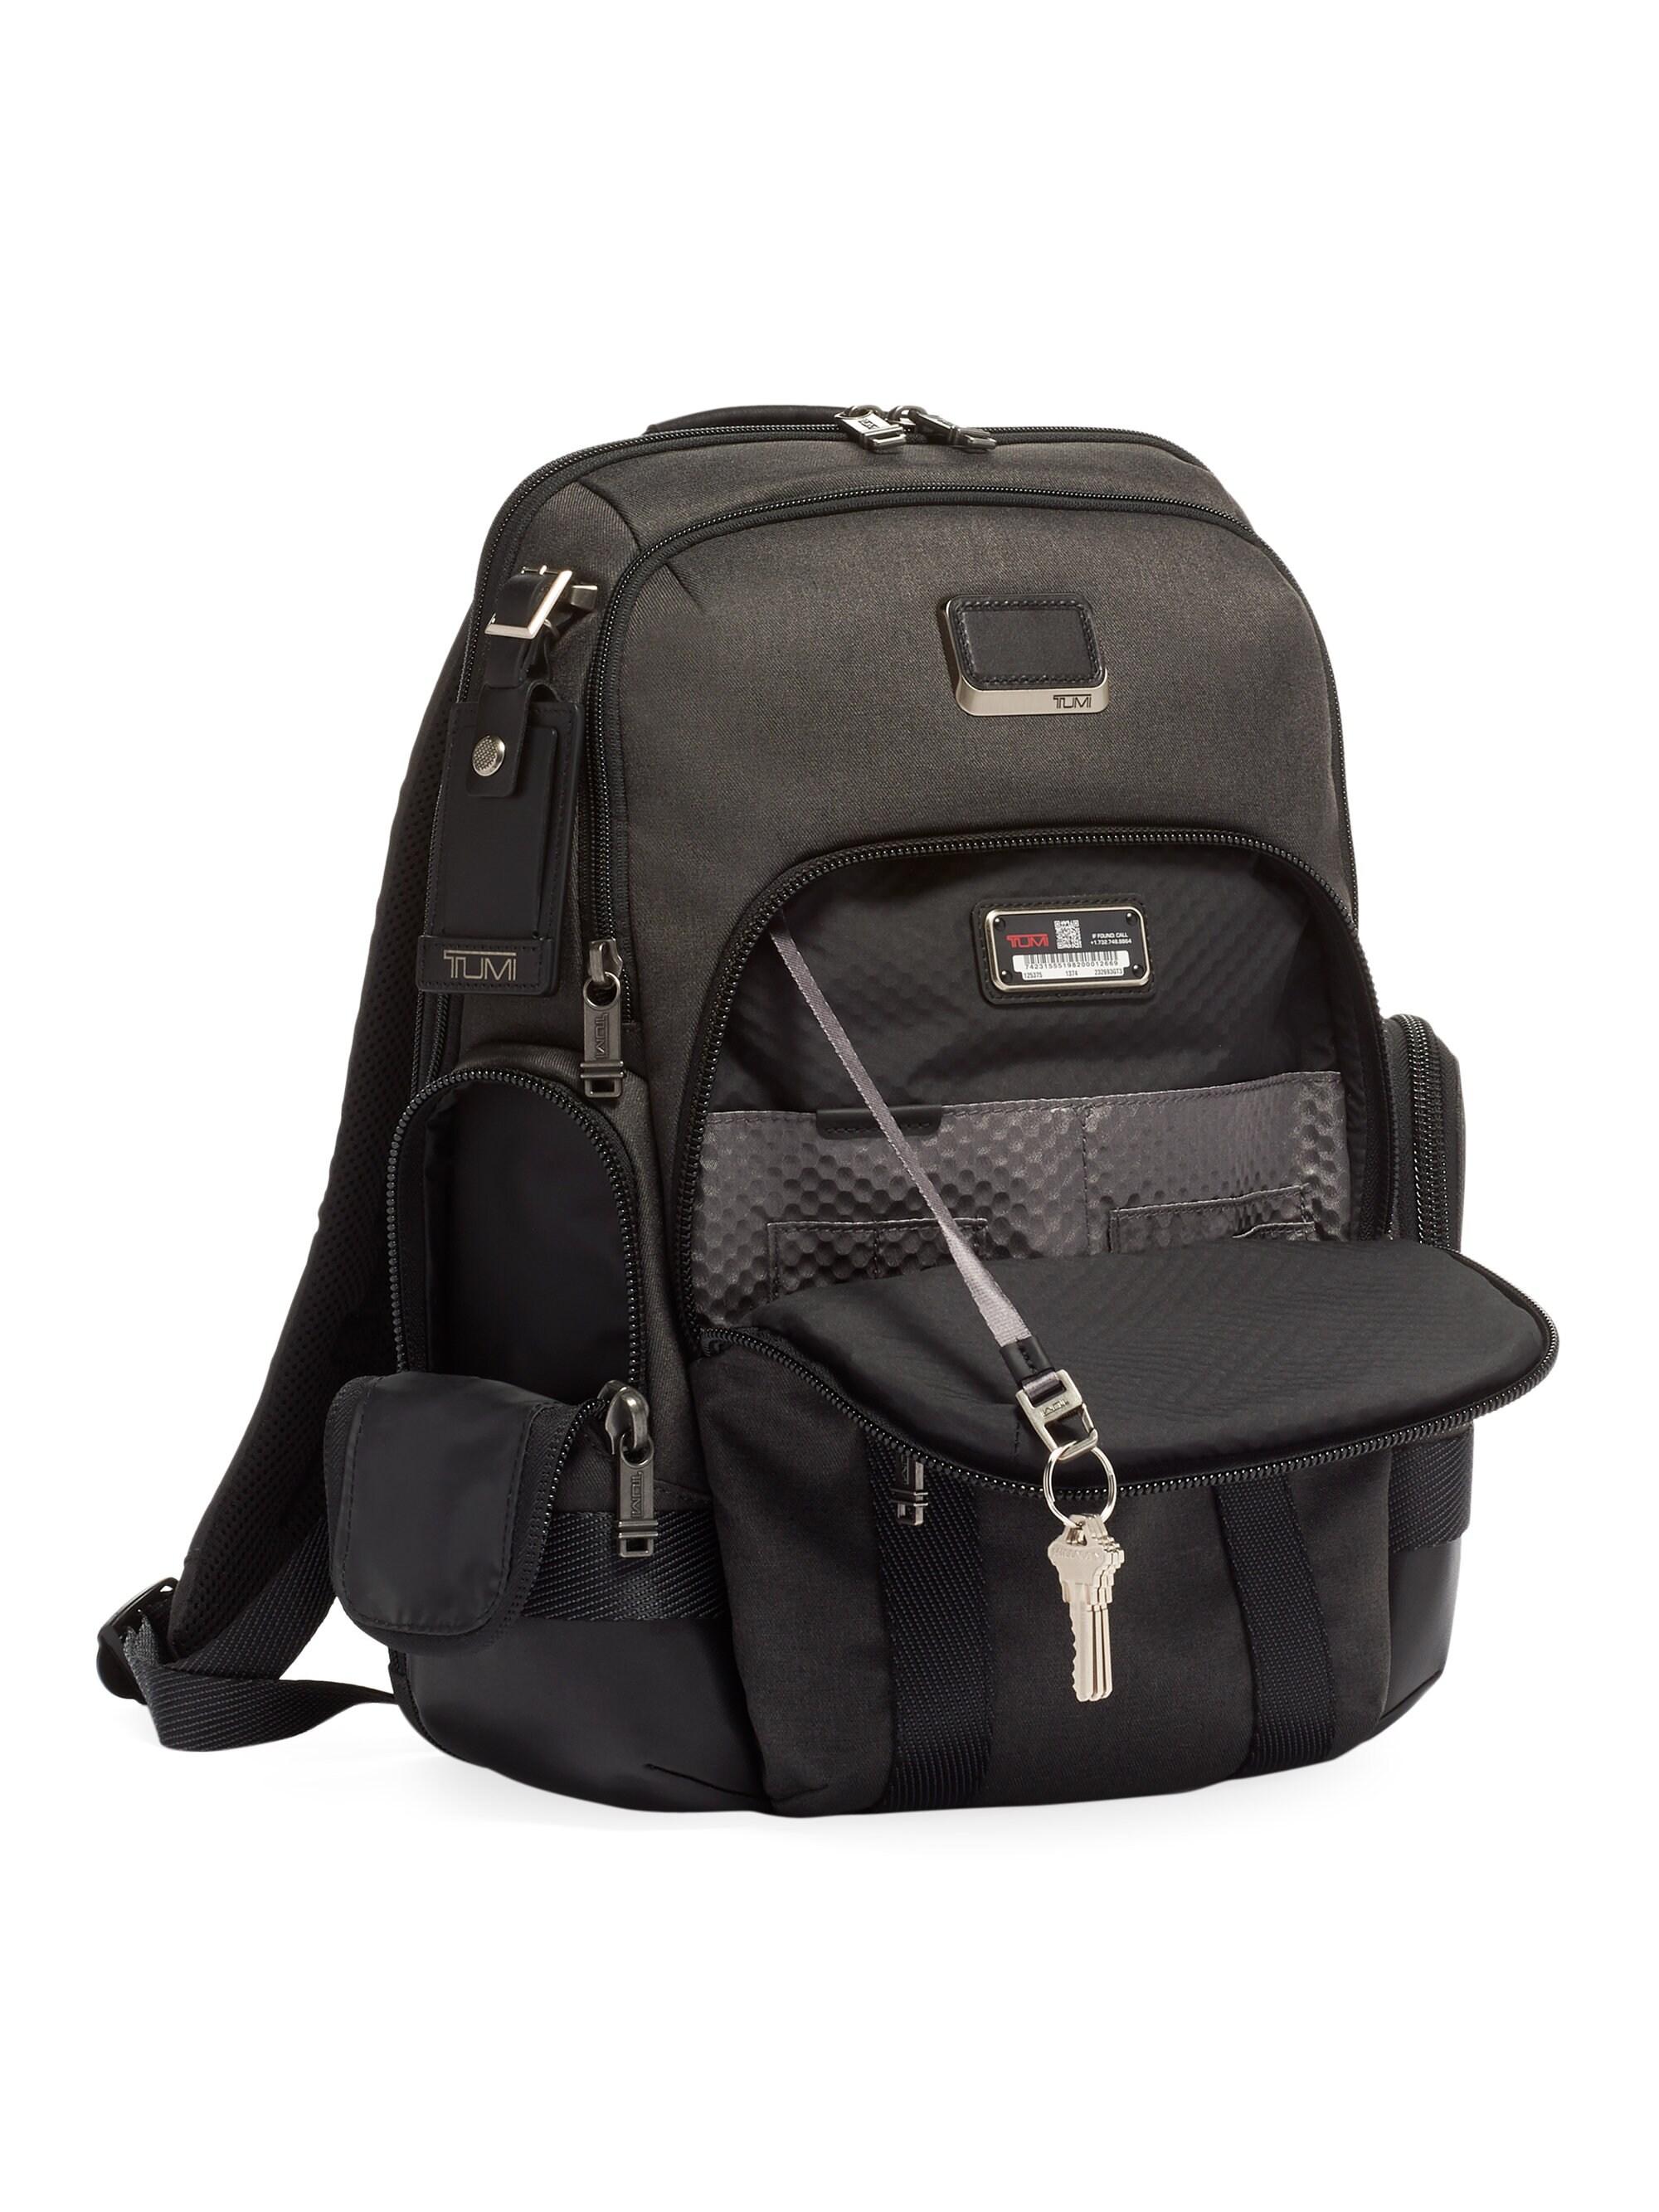 Tumi Alpha Nathan Expandable Backpack in Graphite (Black) for Men 